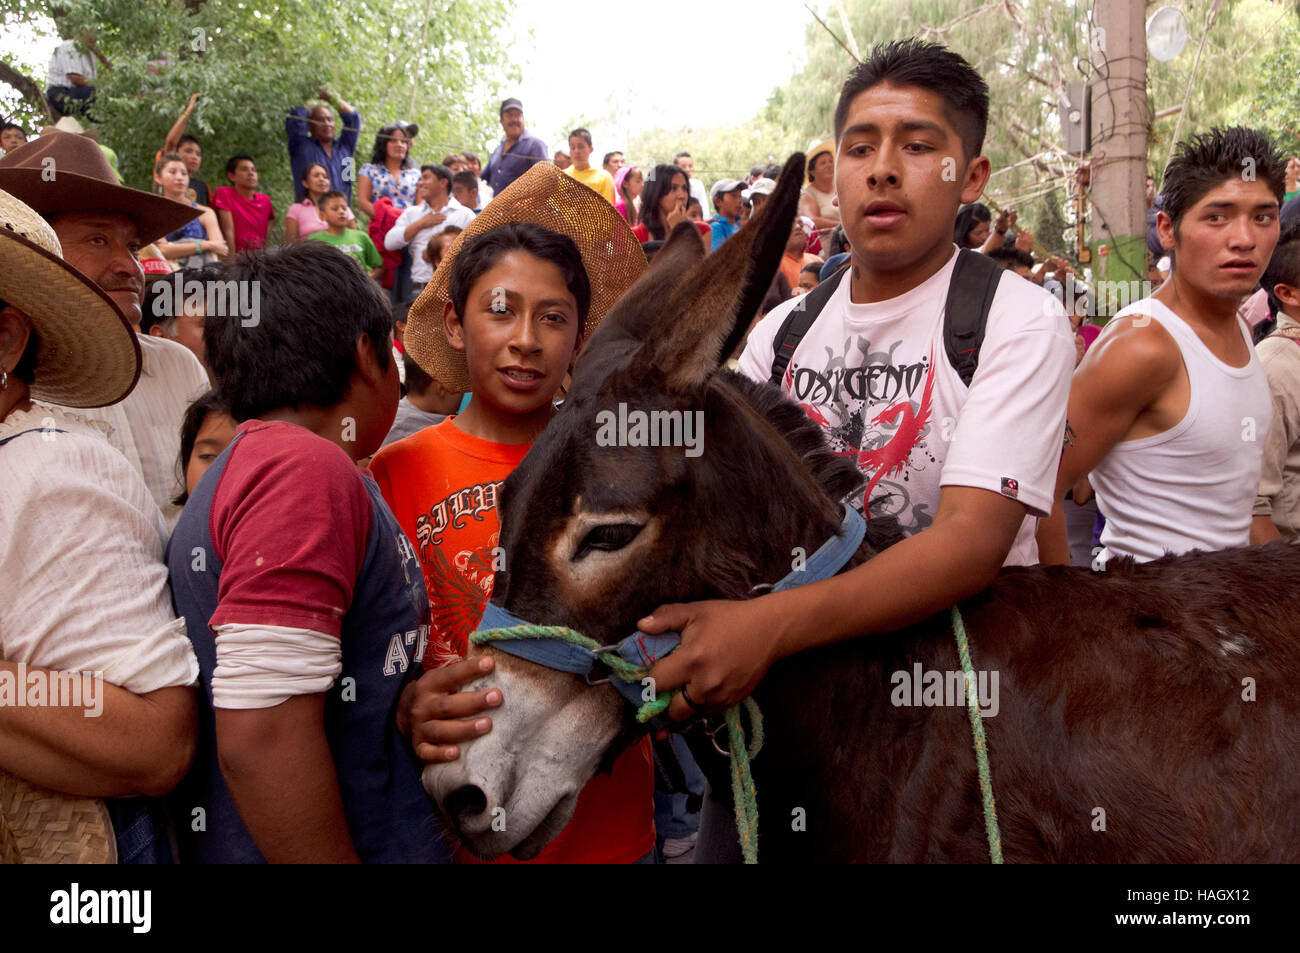 Second place winner of the traditional donkey race at the Donkey fair (Feria del burro) in Otumba, Mexico Stock Photo